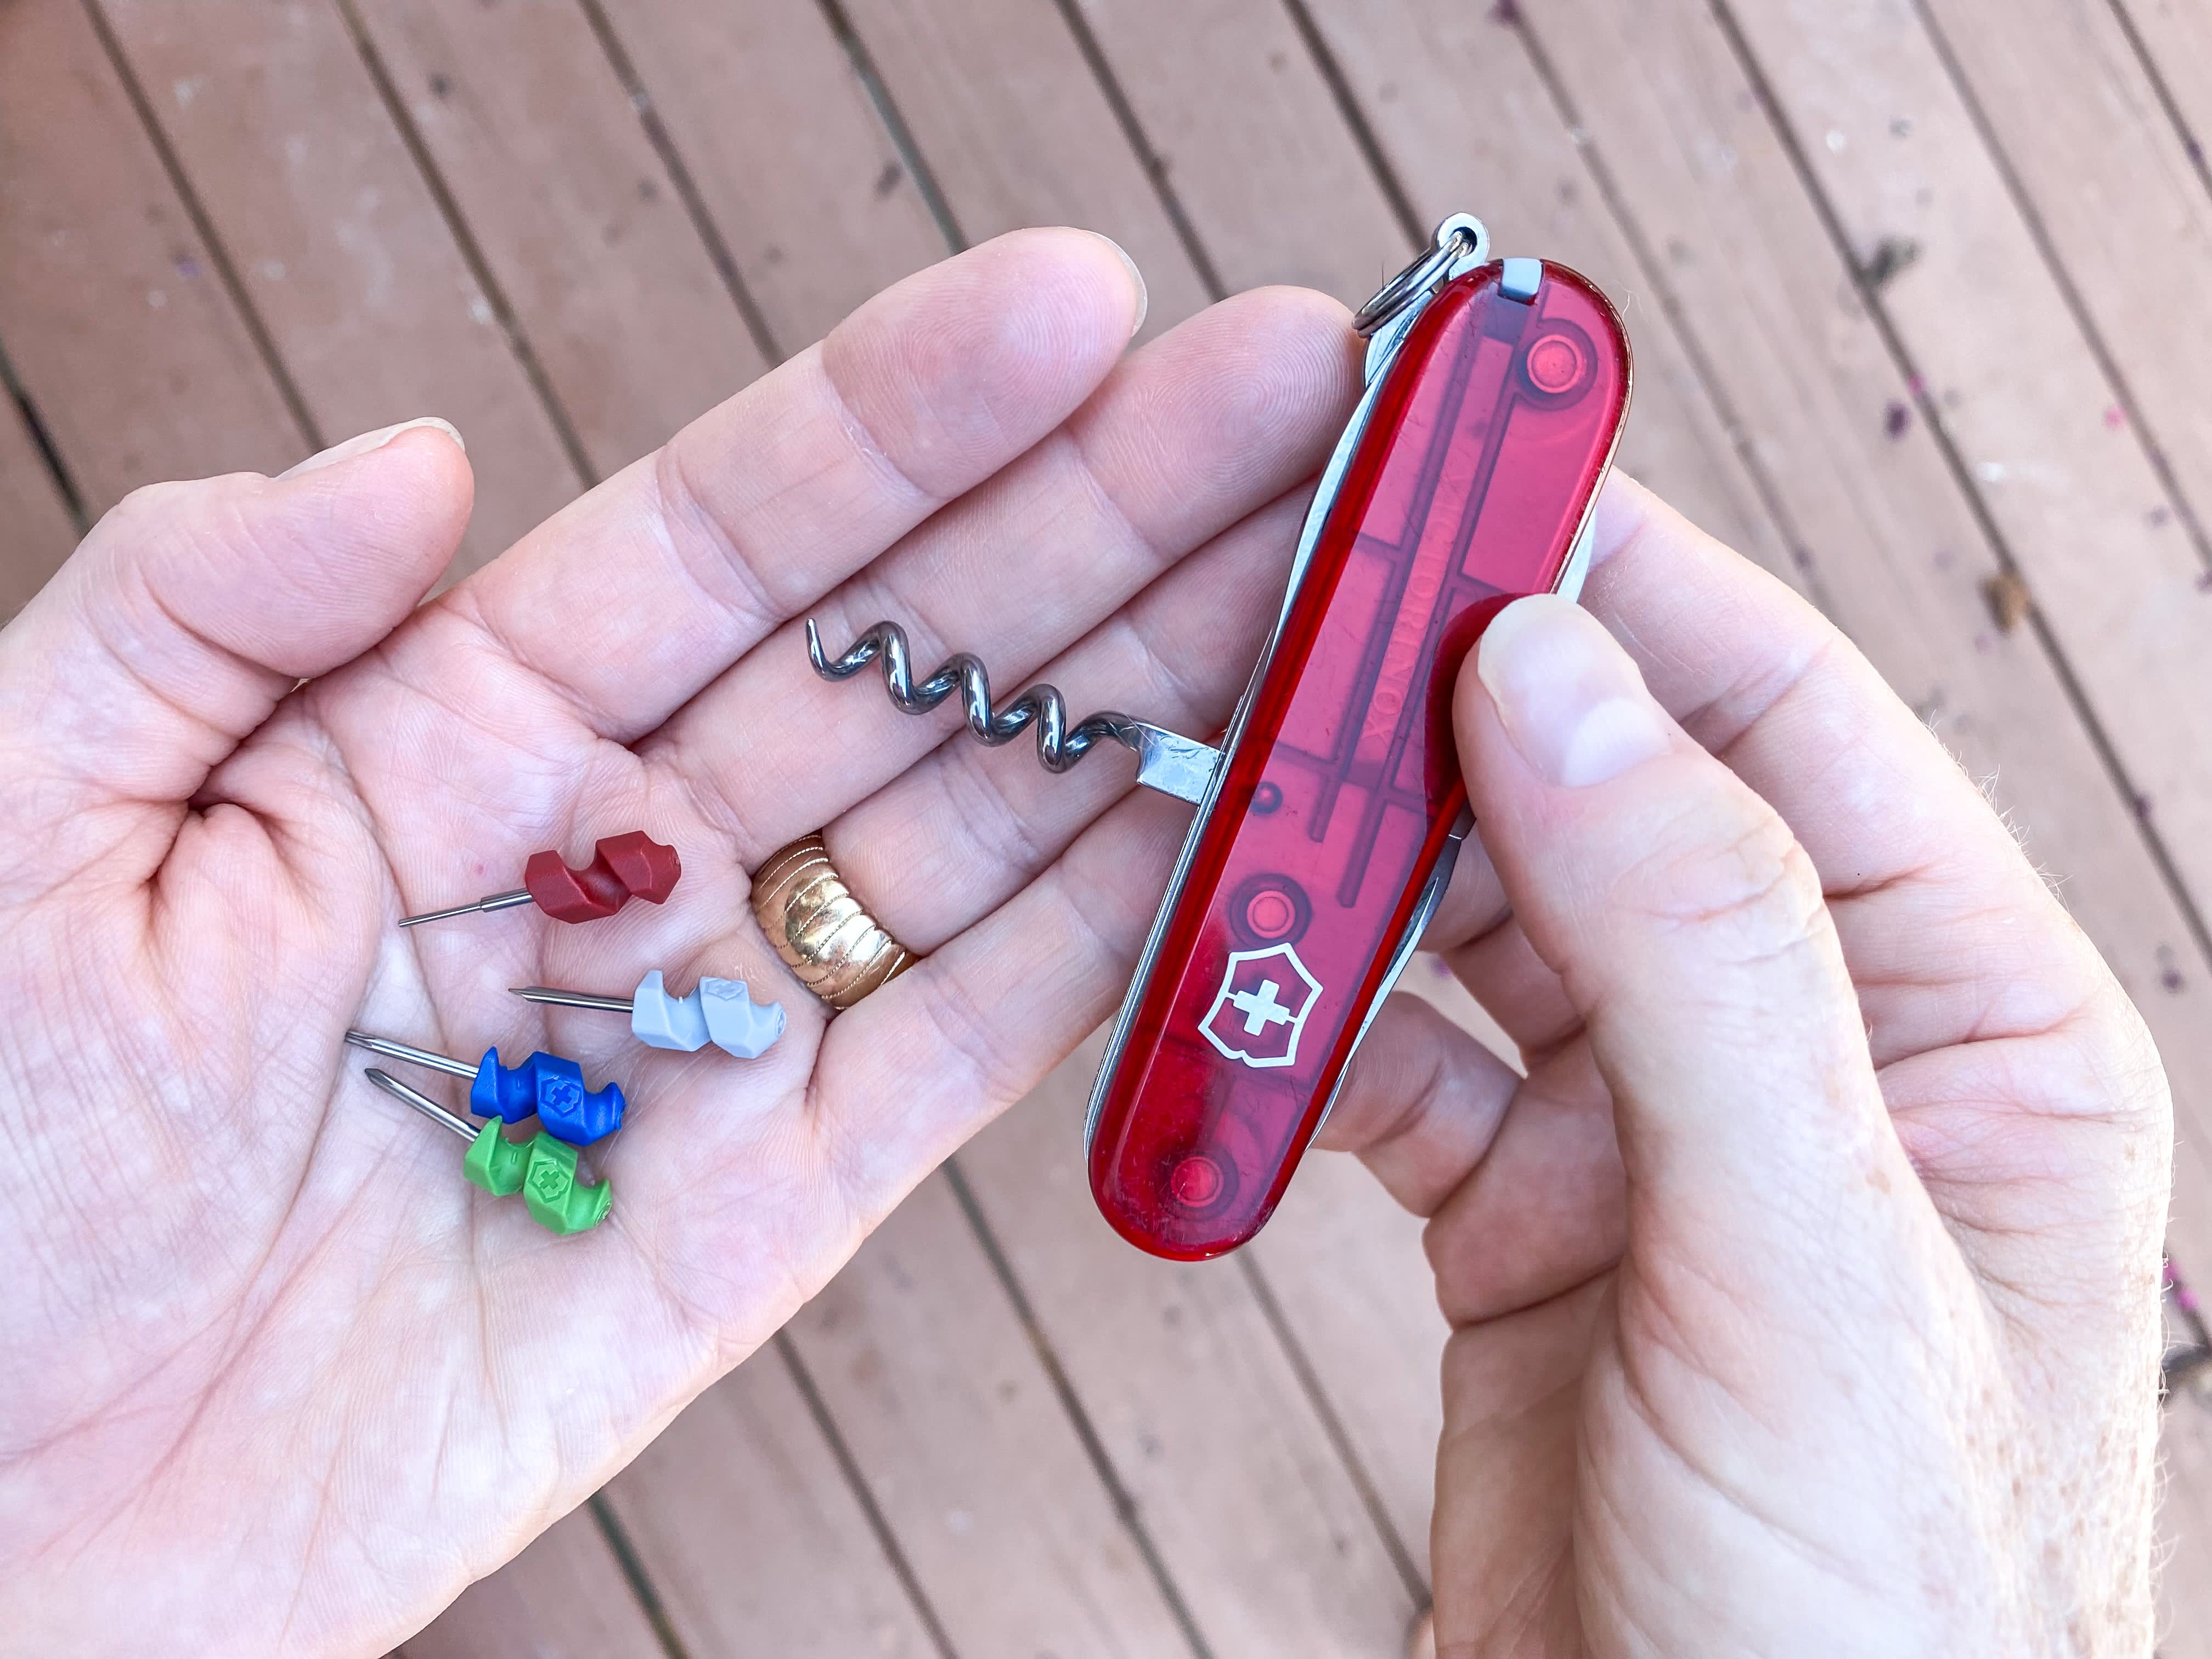 Why I Love My Swiss Army Knife and Mini Tools: Review